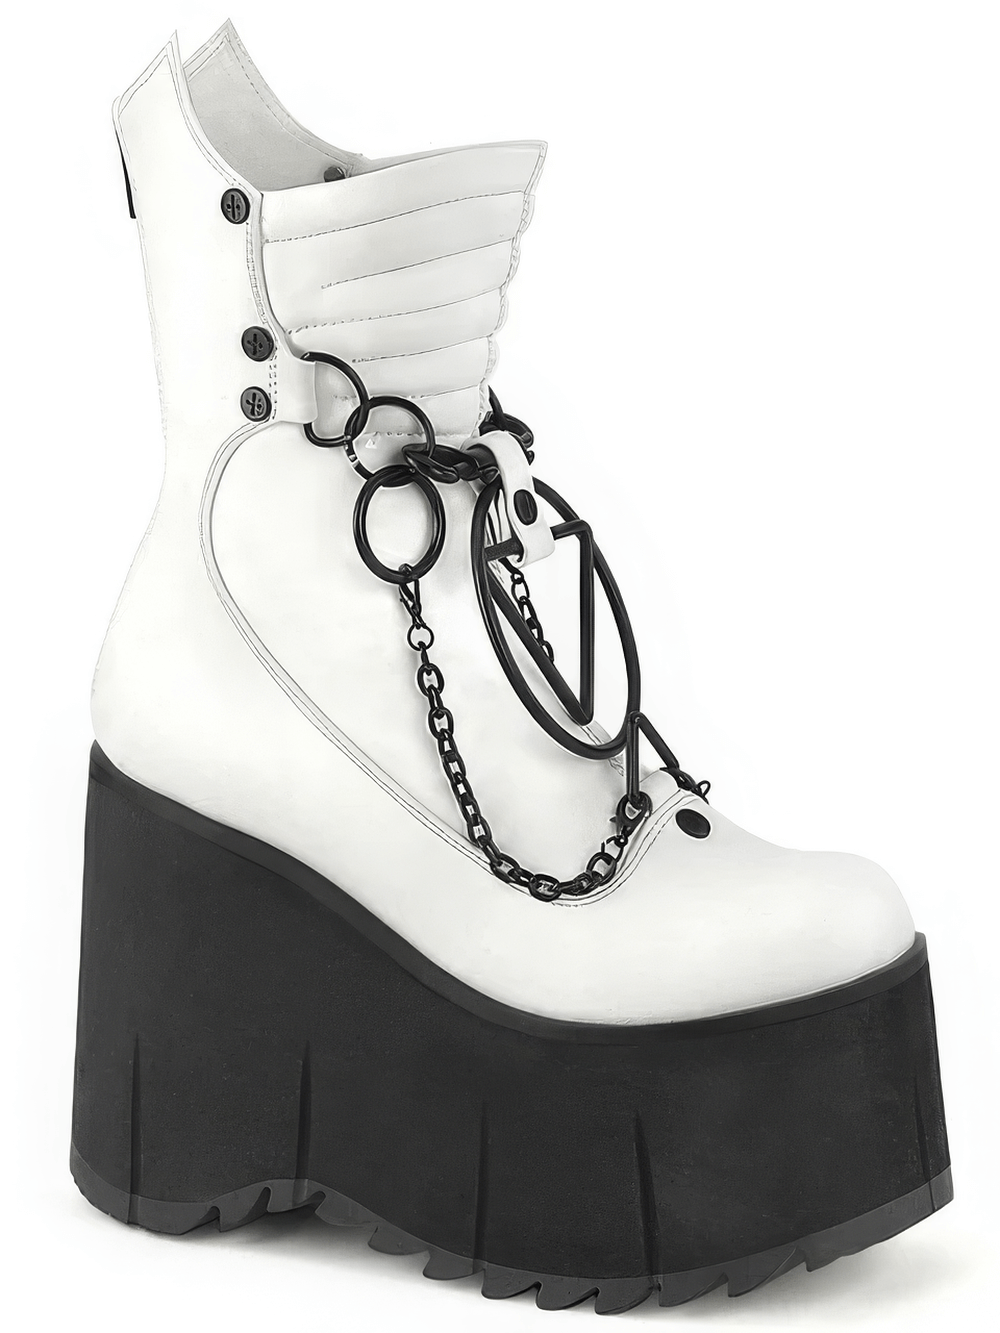 DEMONIA Punk-Inspired Mid-Calf Platform Boots with Chains